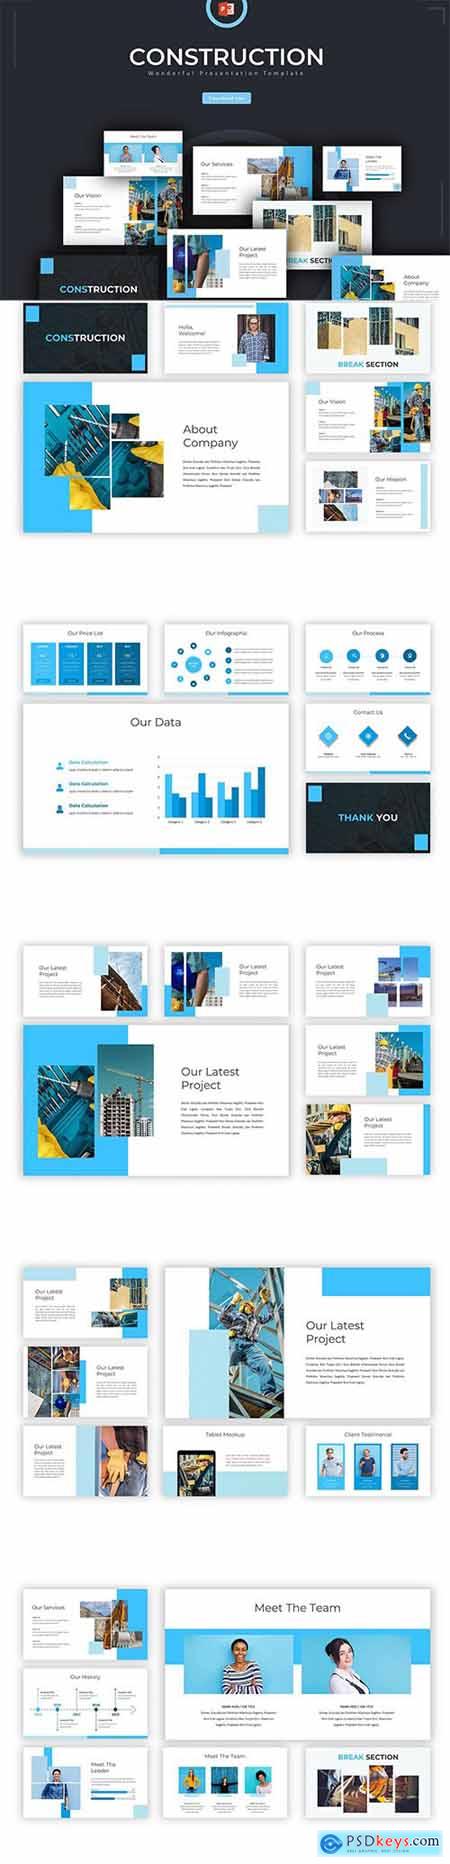 Construction - Powerpoint Template